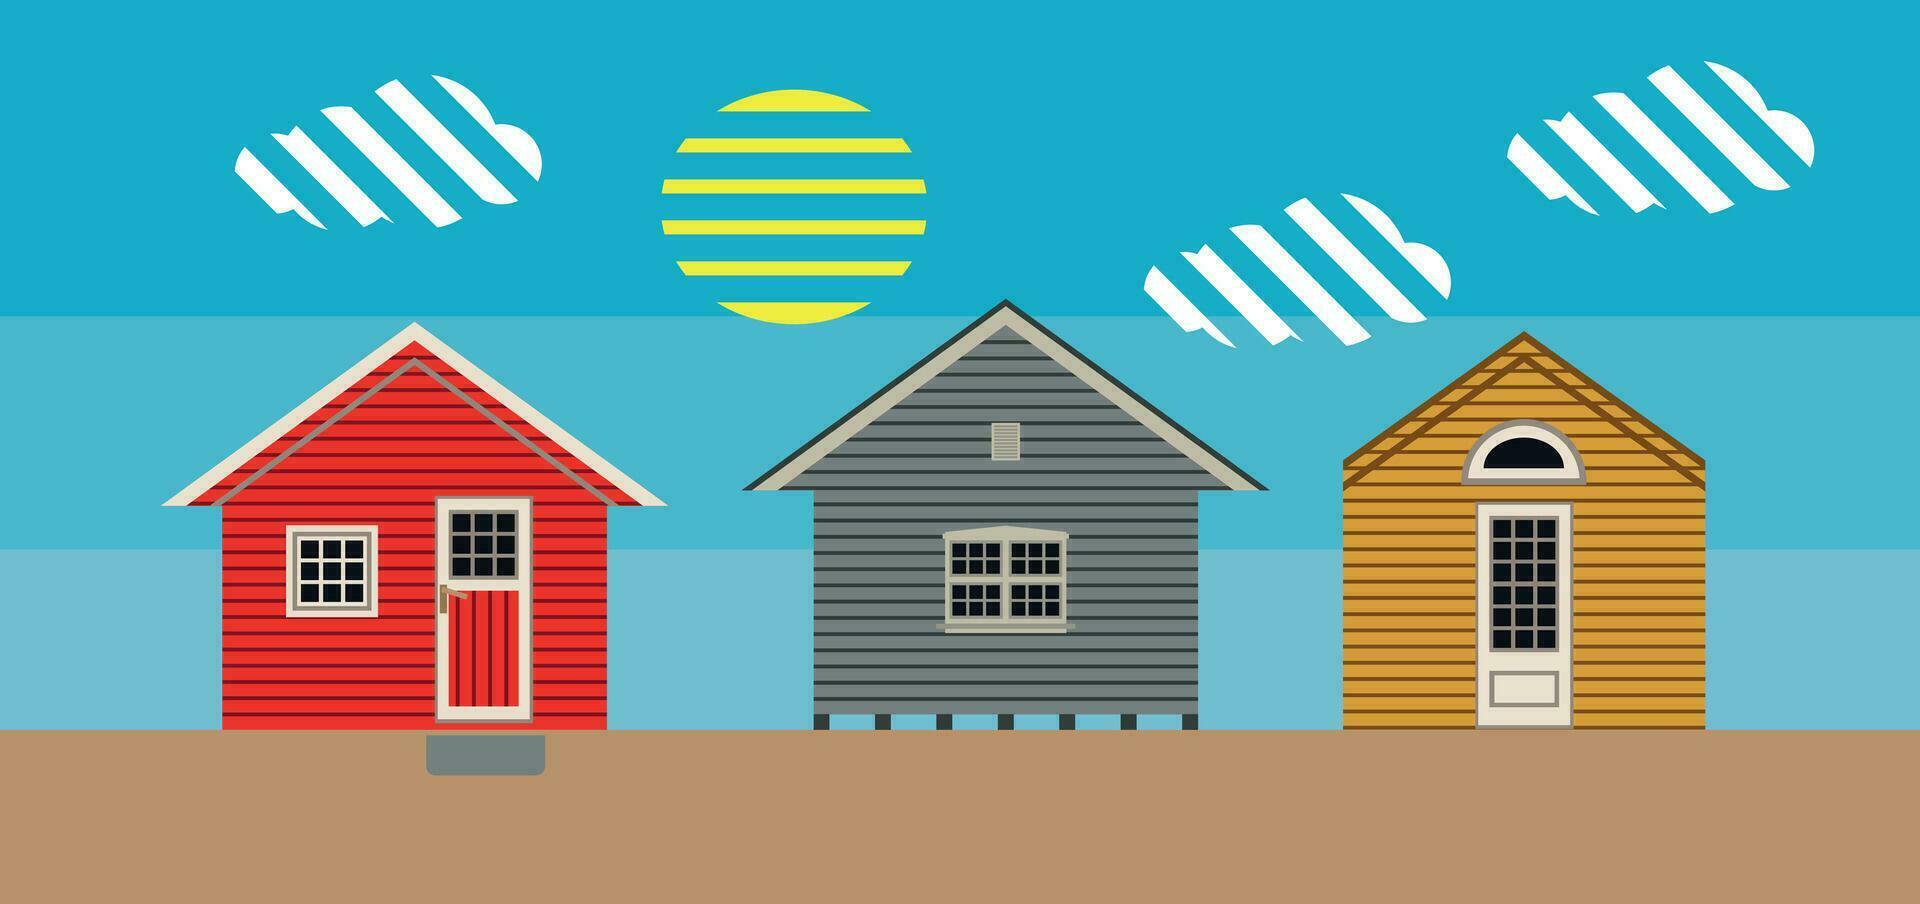 Summer, bright houses by the sea. Clouds and sun over the village. Vector illustration